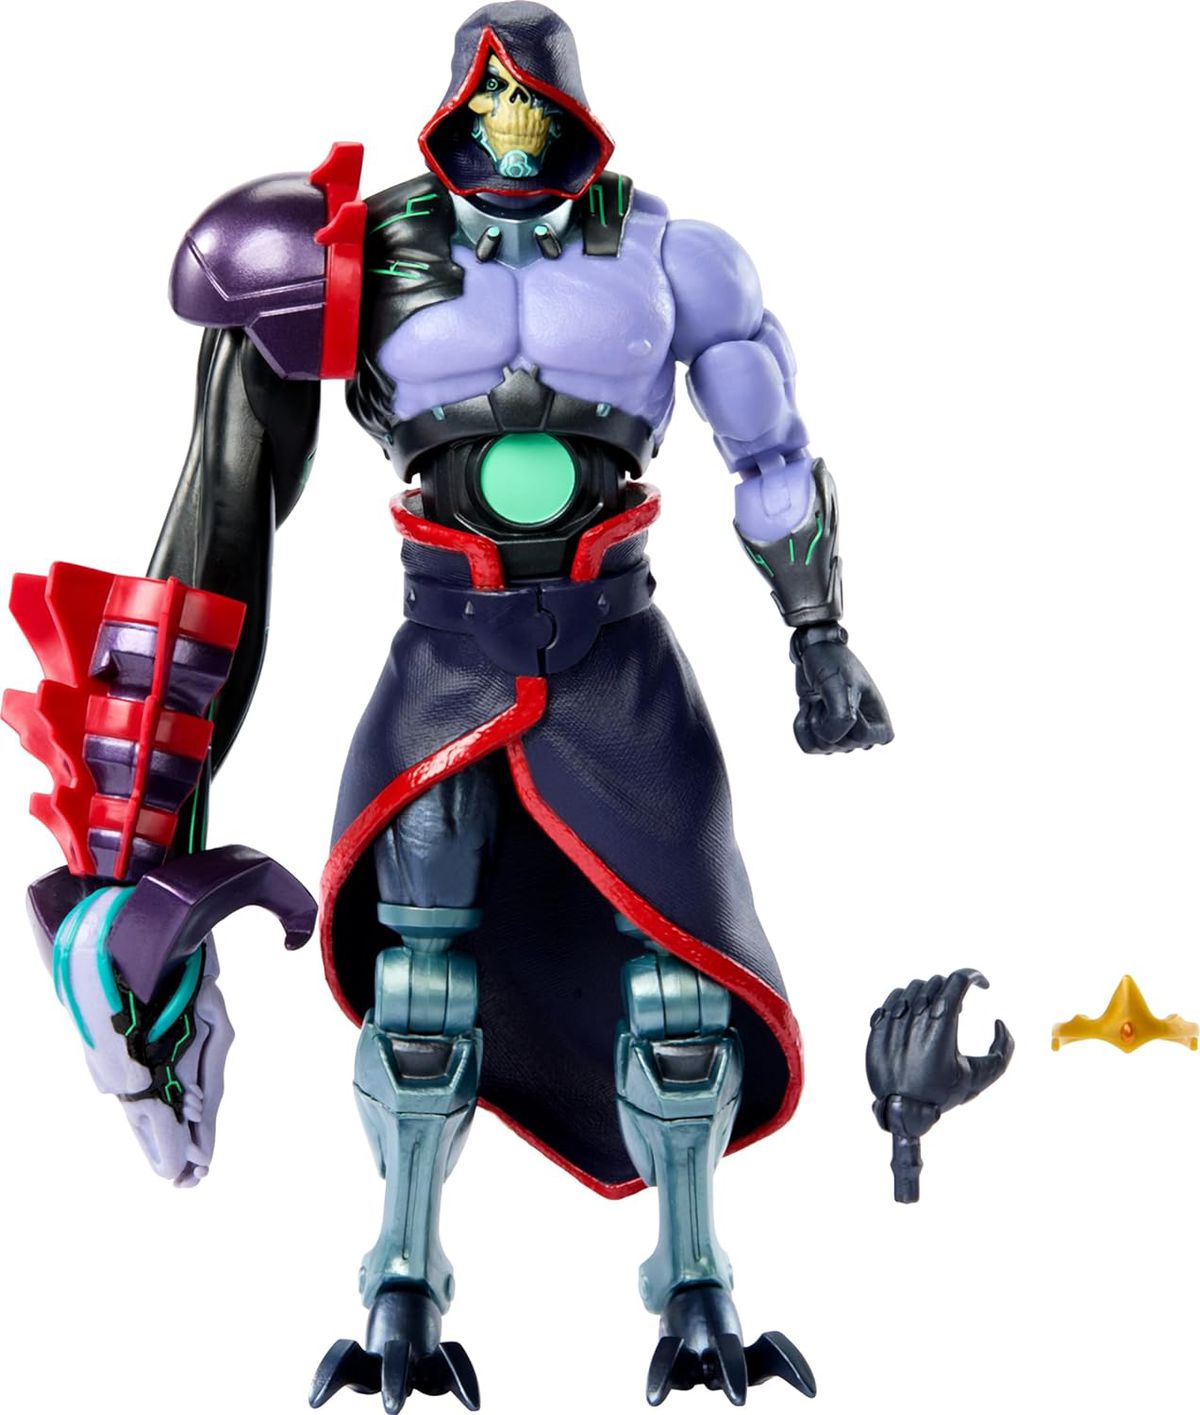 Product image of a cyborg Skeletor action figure with robotic legs and a ram's main arm